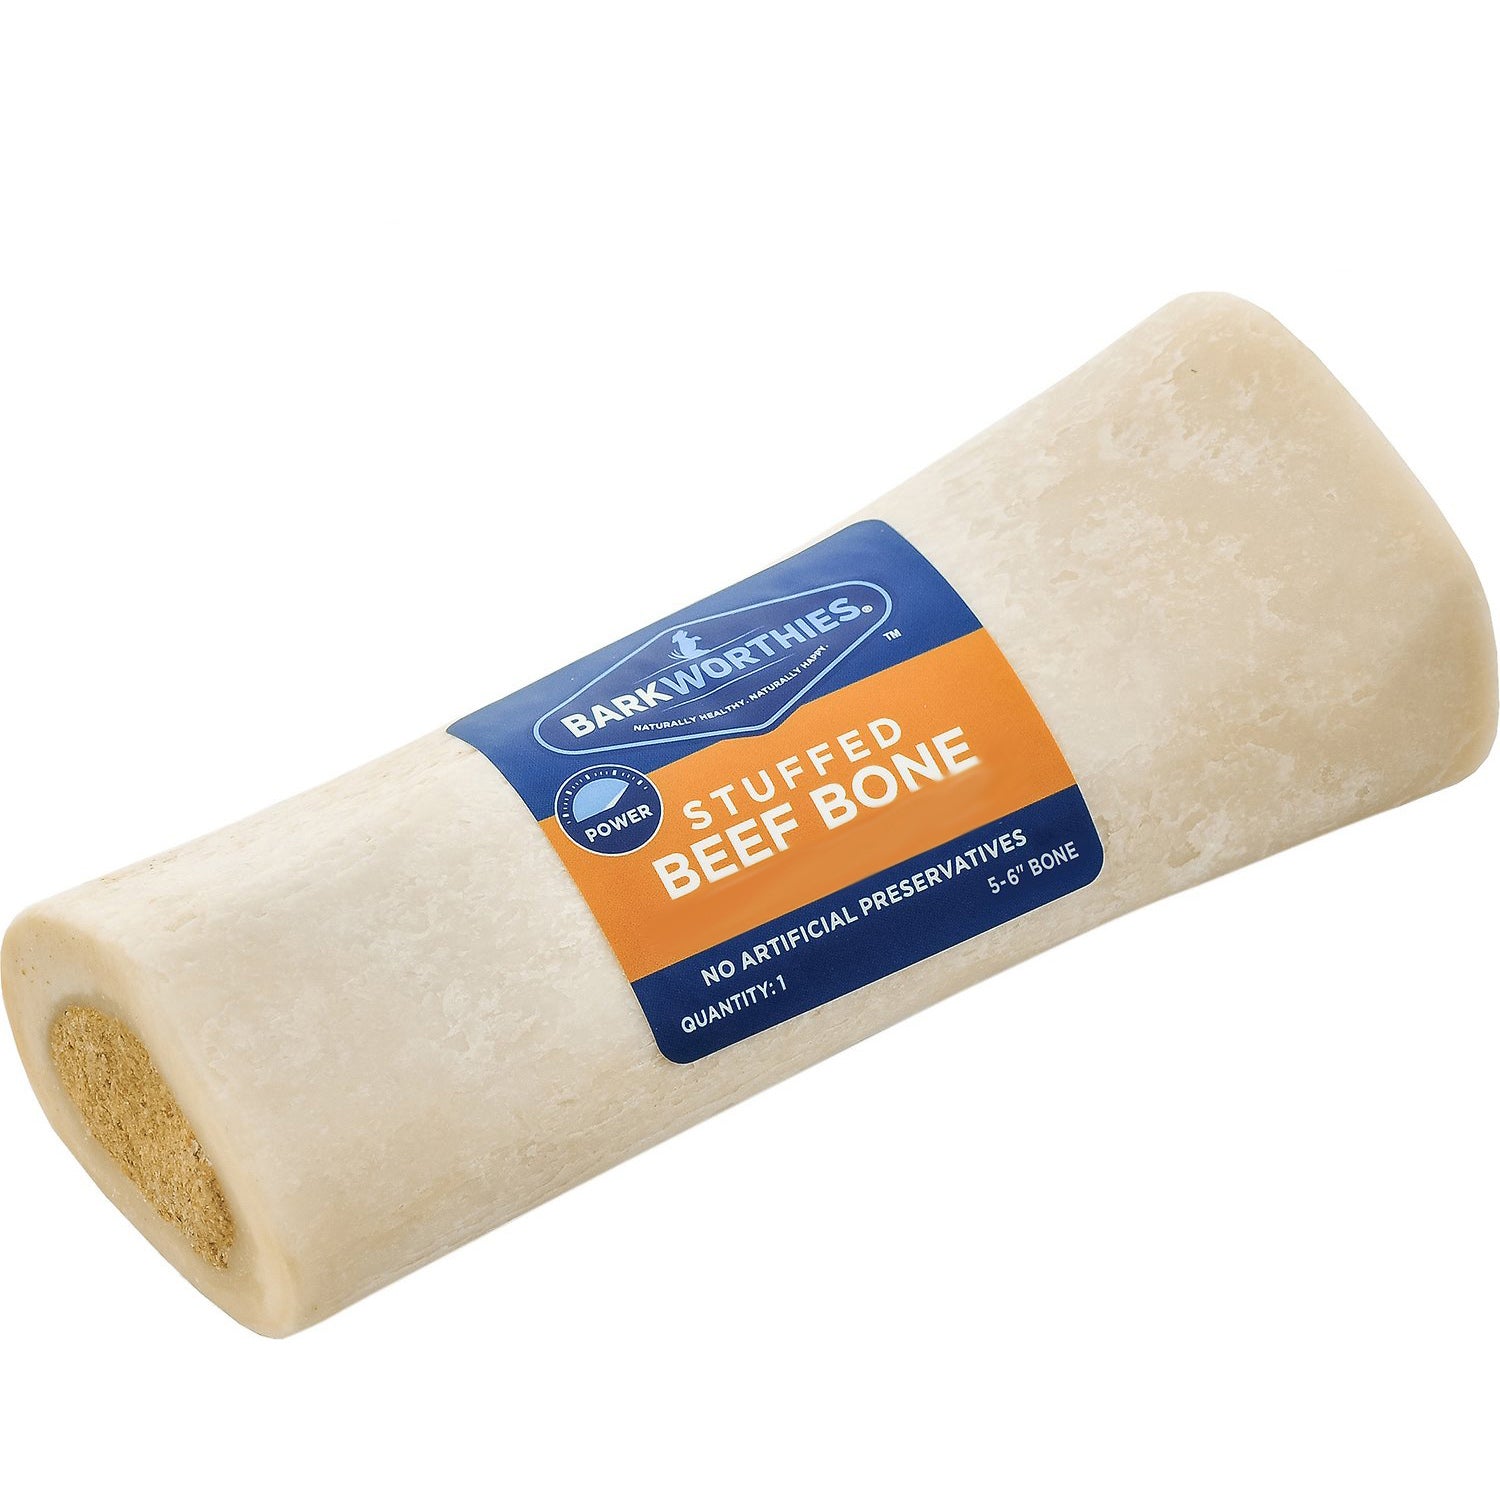 Barkworthies Large Bacon & Cheese Filled Bones For Dogs